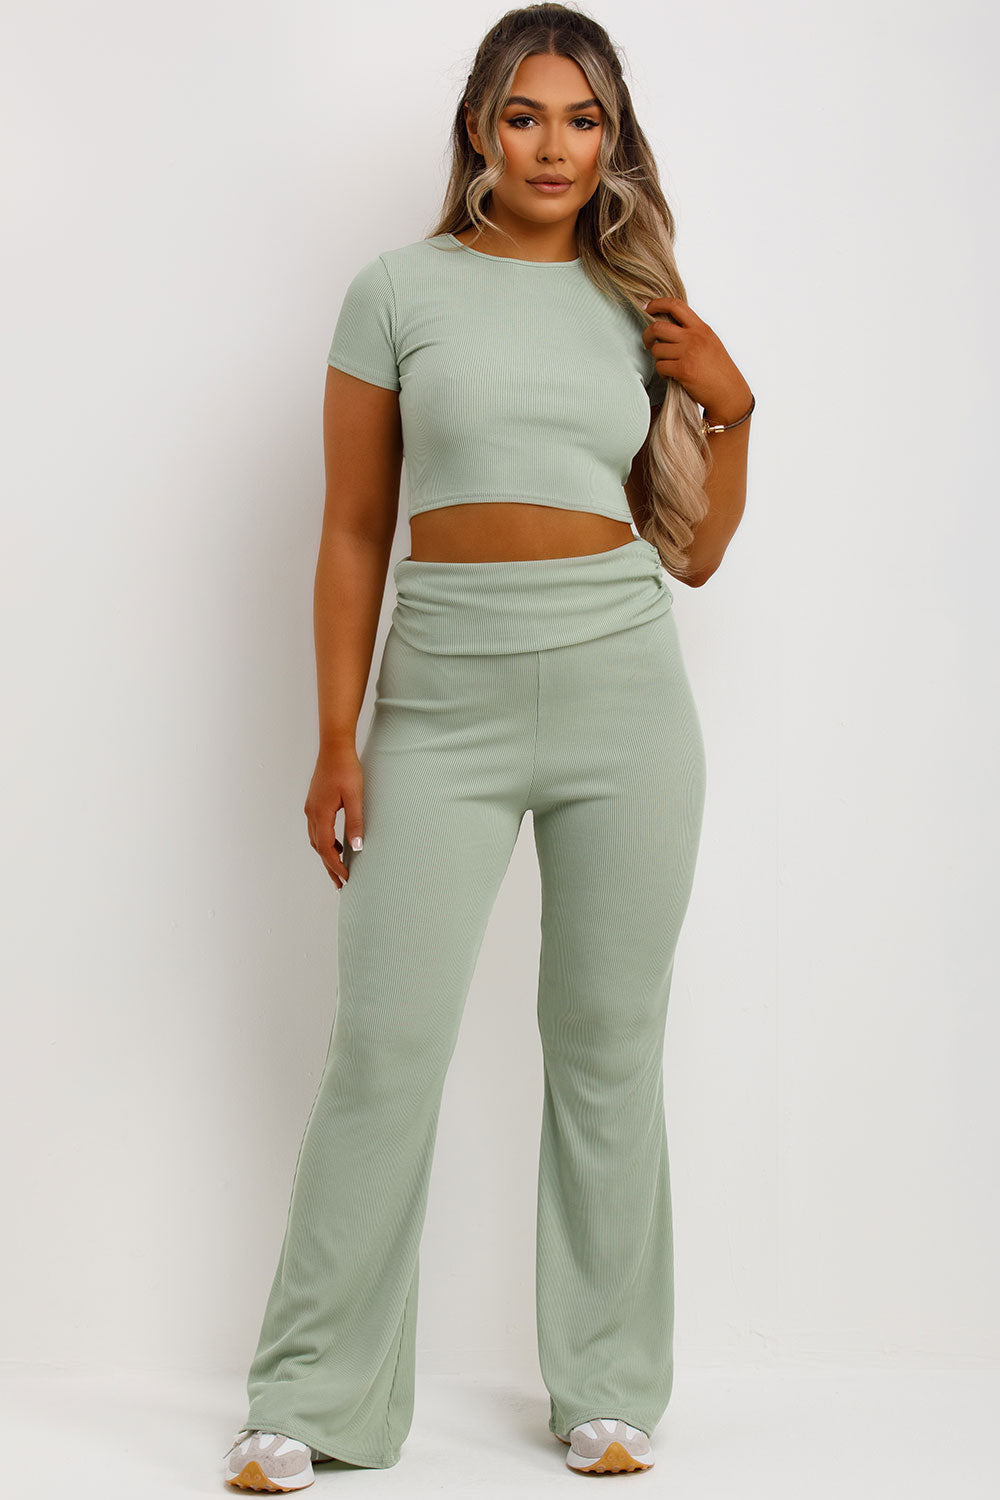 fold over ribbed skinny flared trousers and crop top co ord set